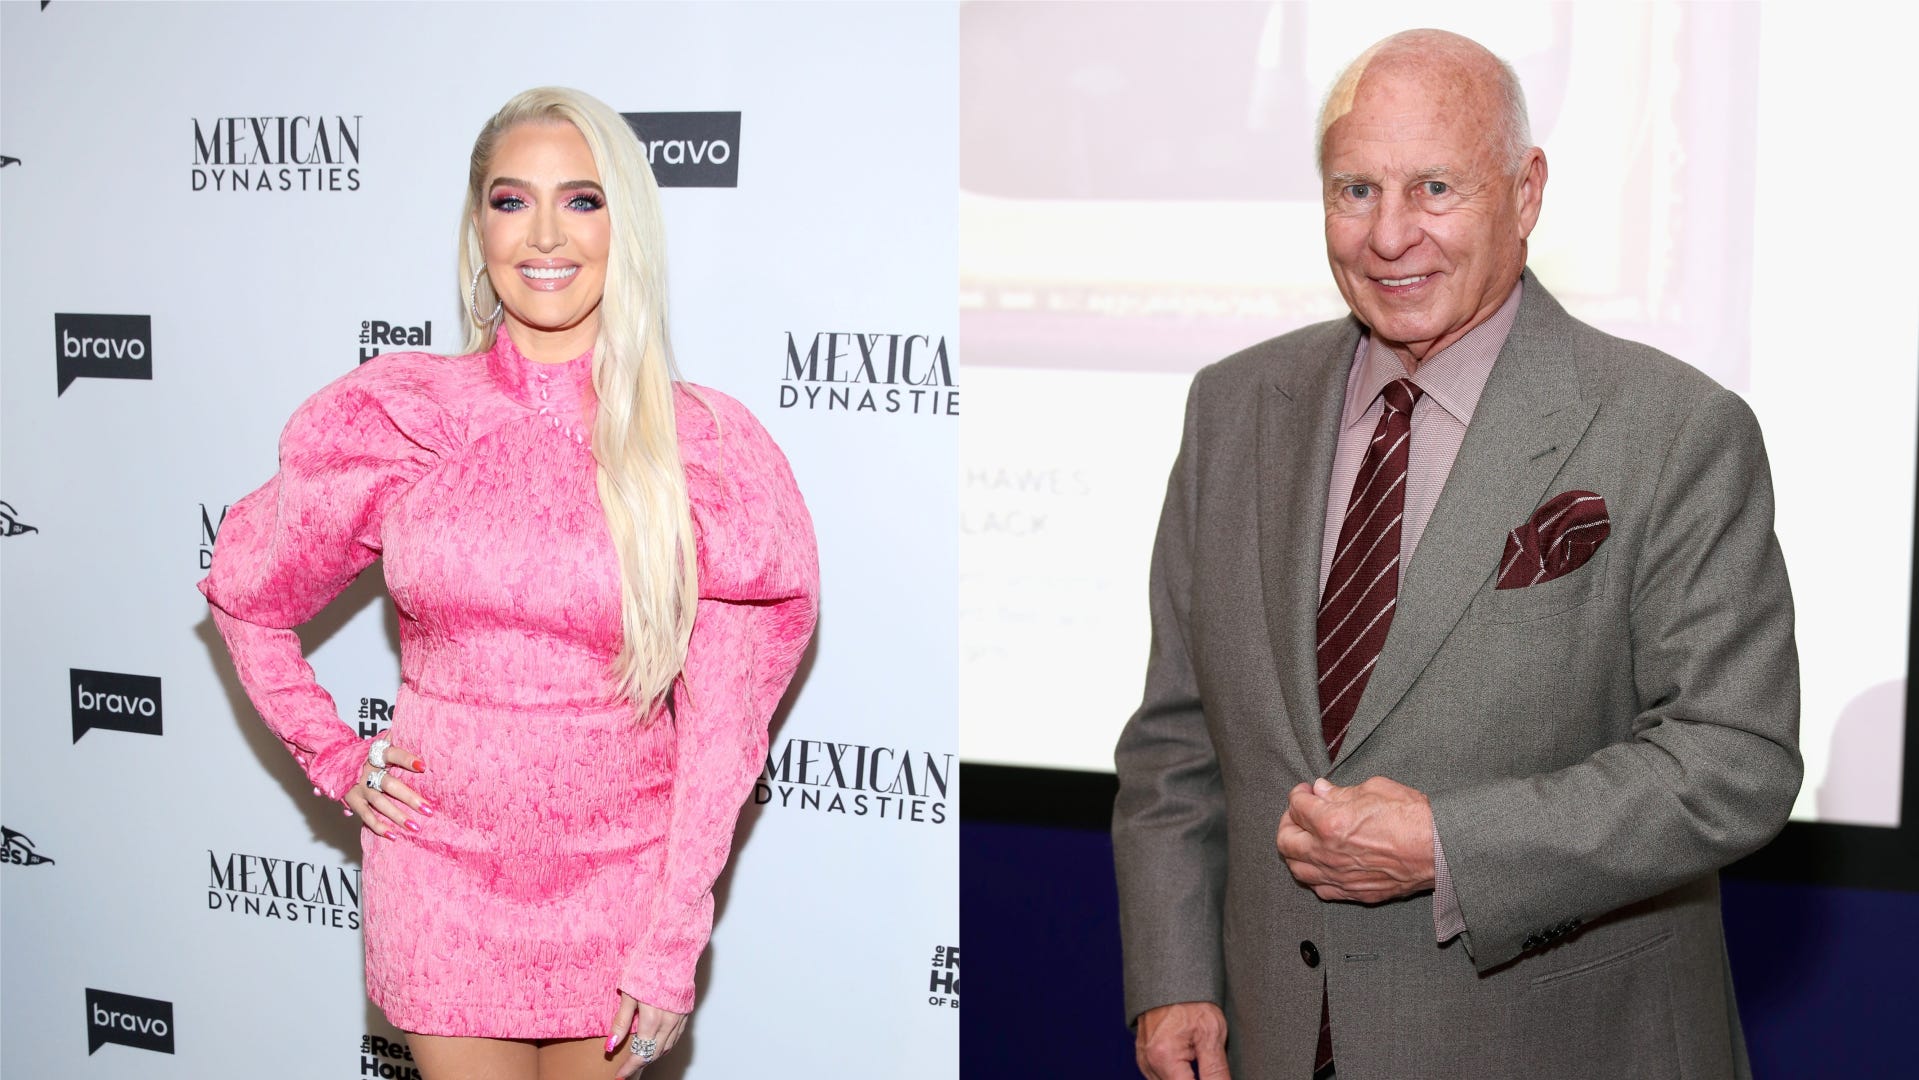 Erika Jayne, Tom Girardi accused of 'sham' divorce announcement to hide from embezzlement lawsuit - USA TODAY